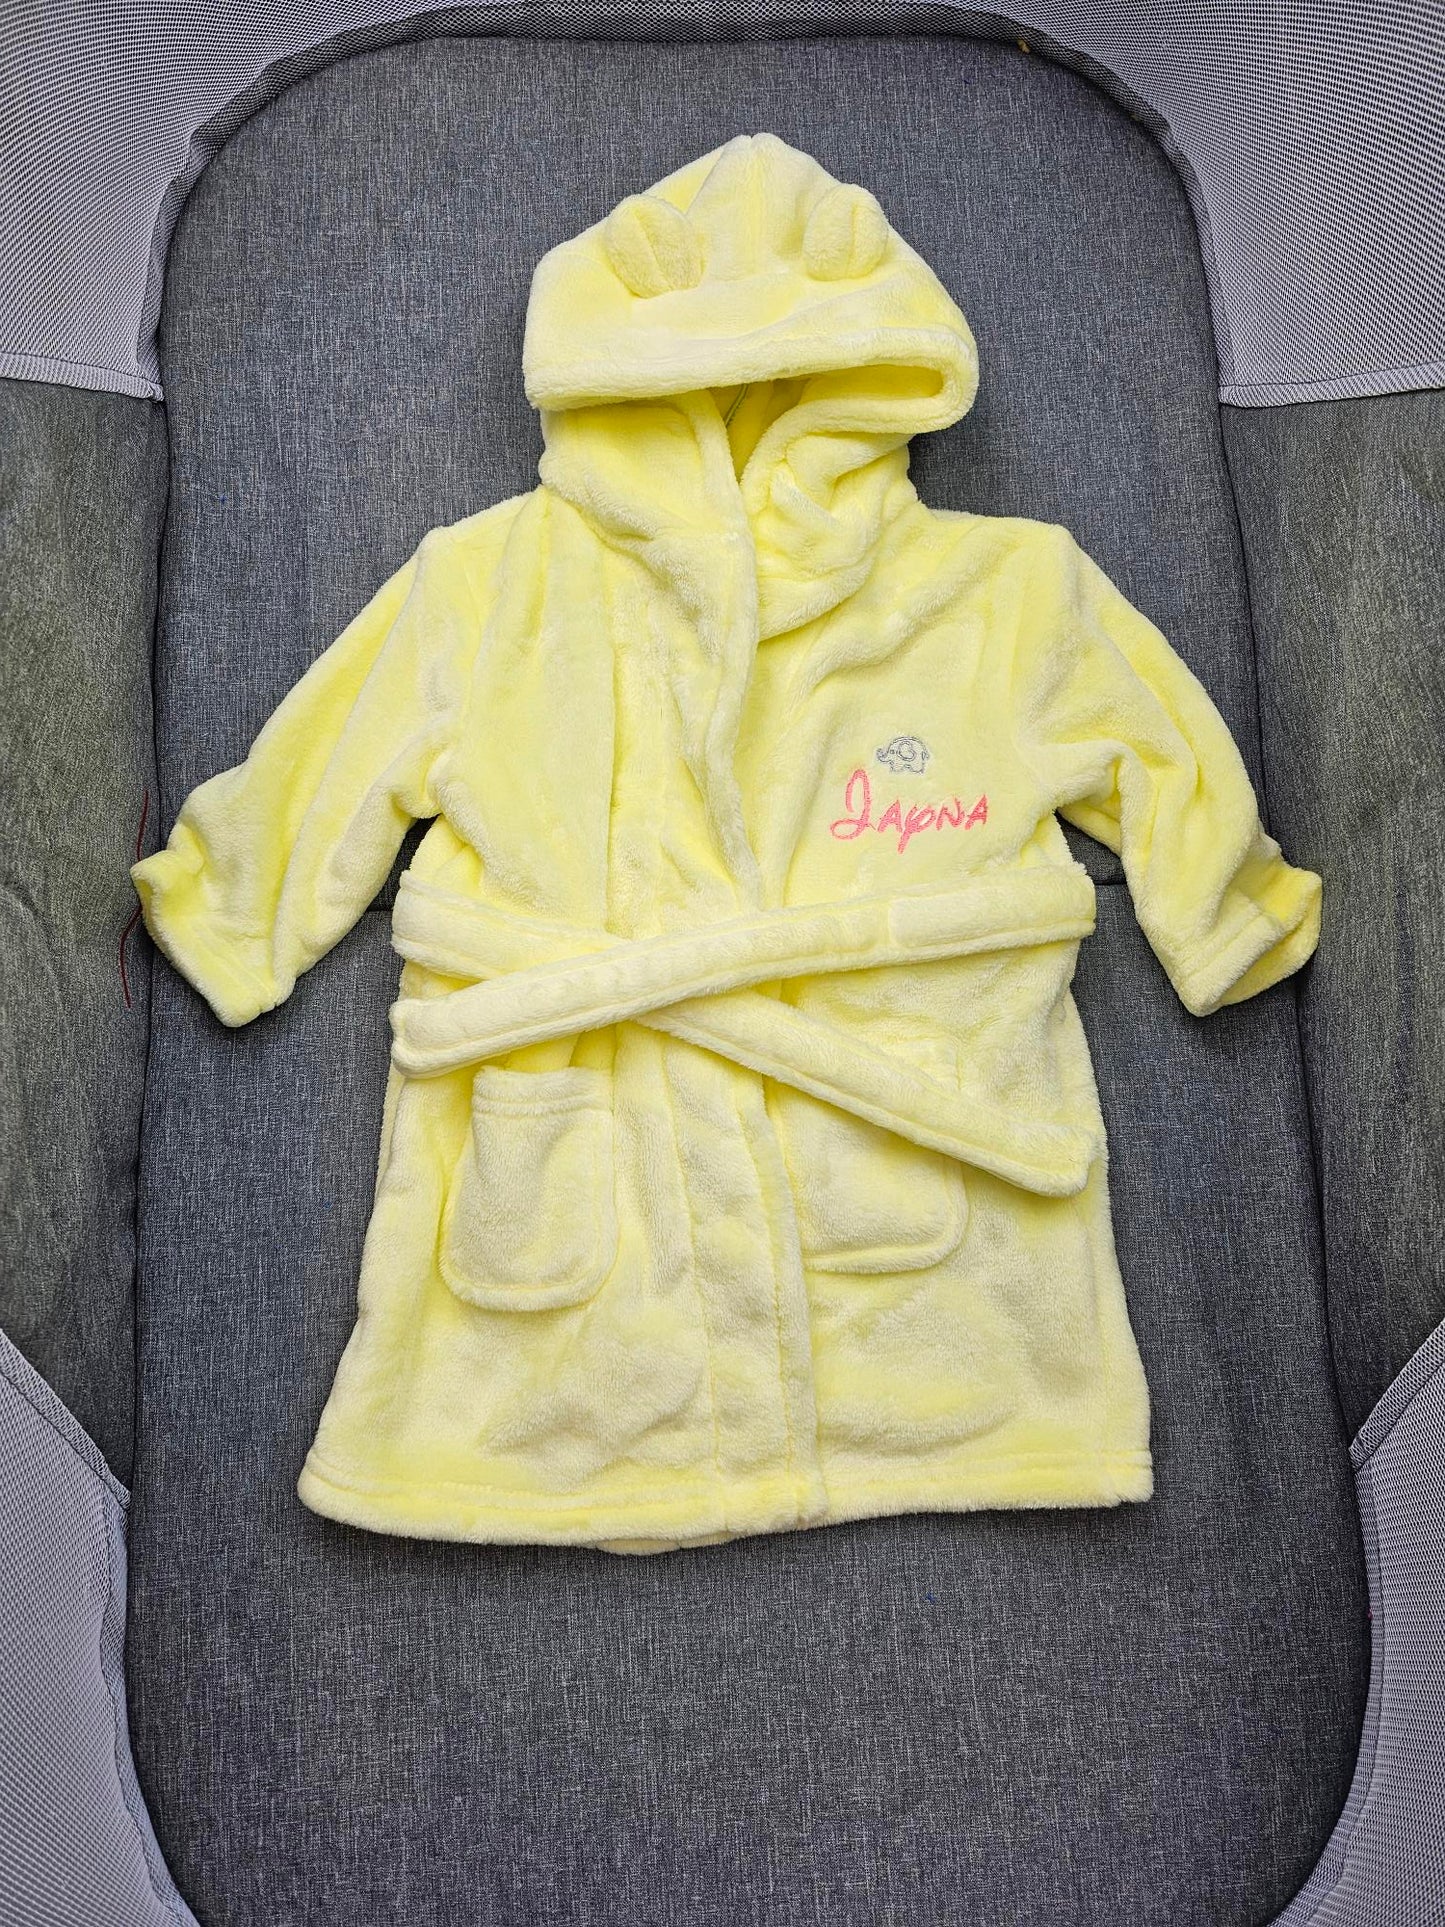 Children's bathrobe | Yellow | Personalized with first name | 3 sizes